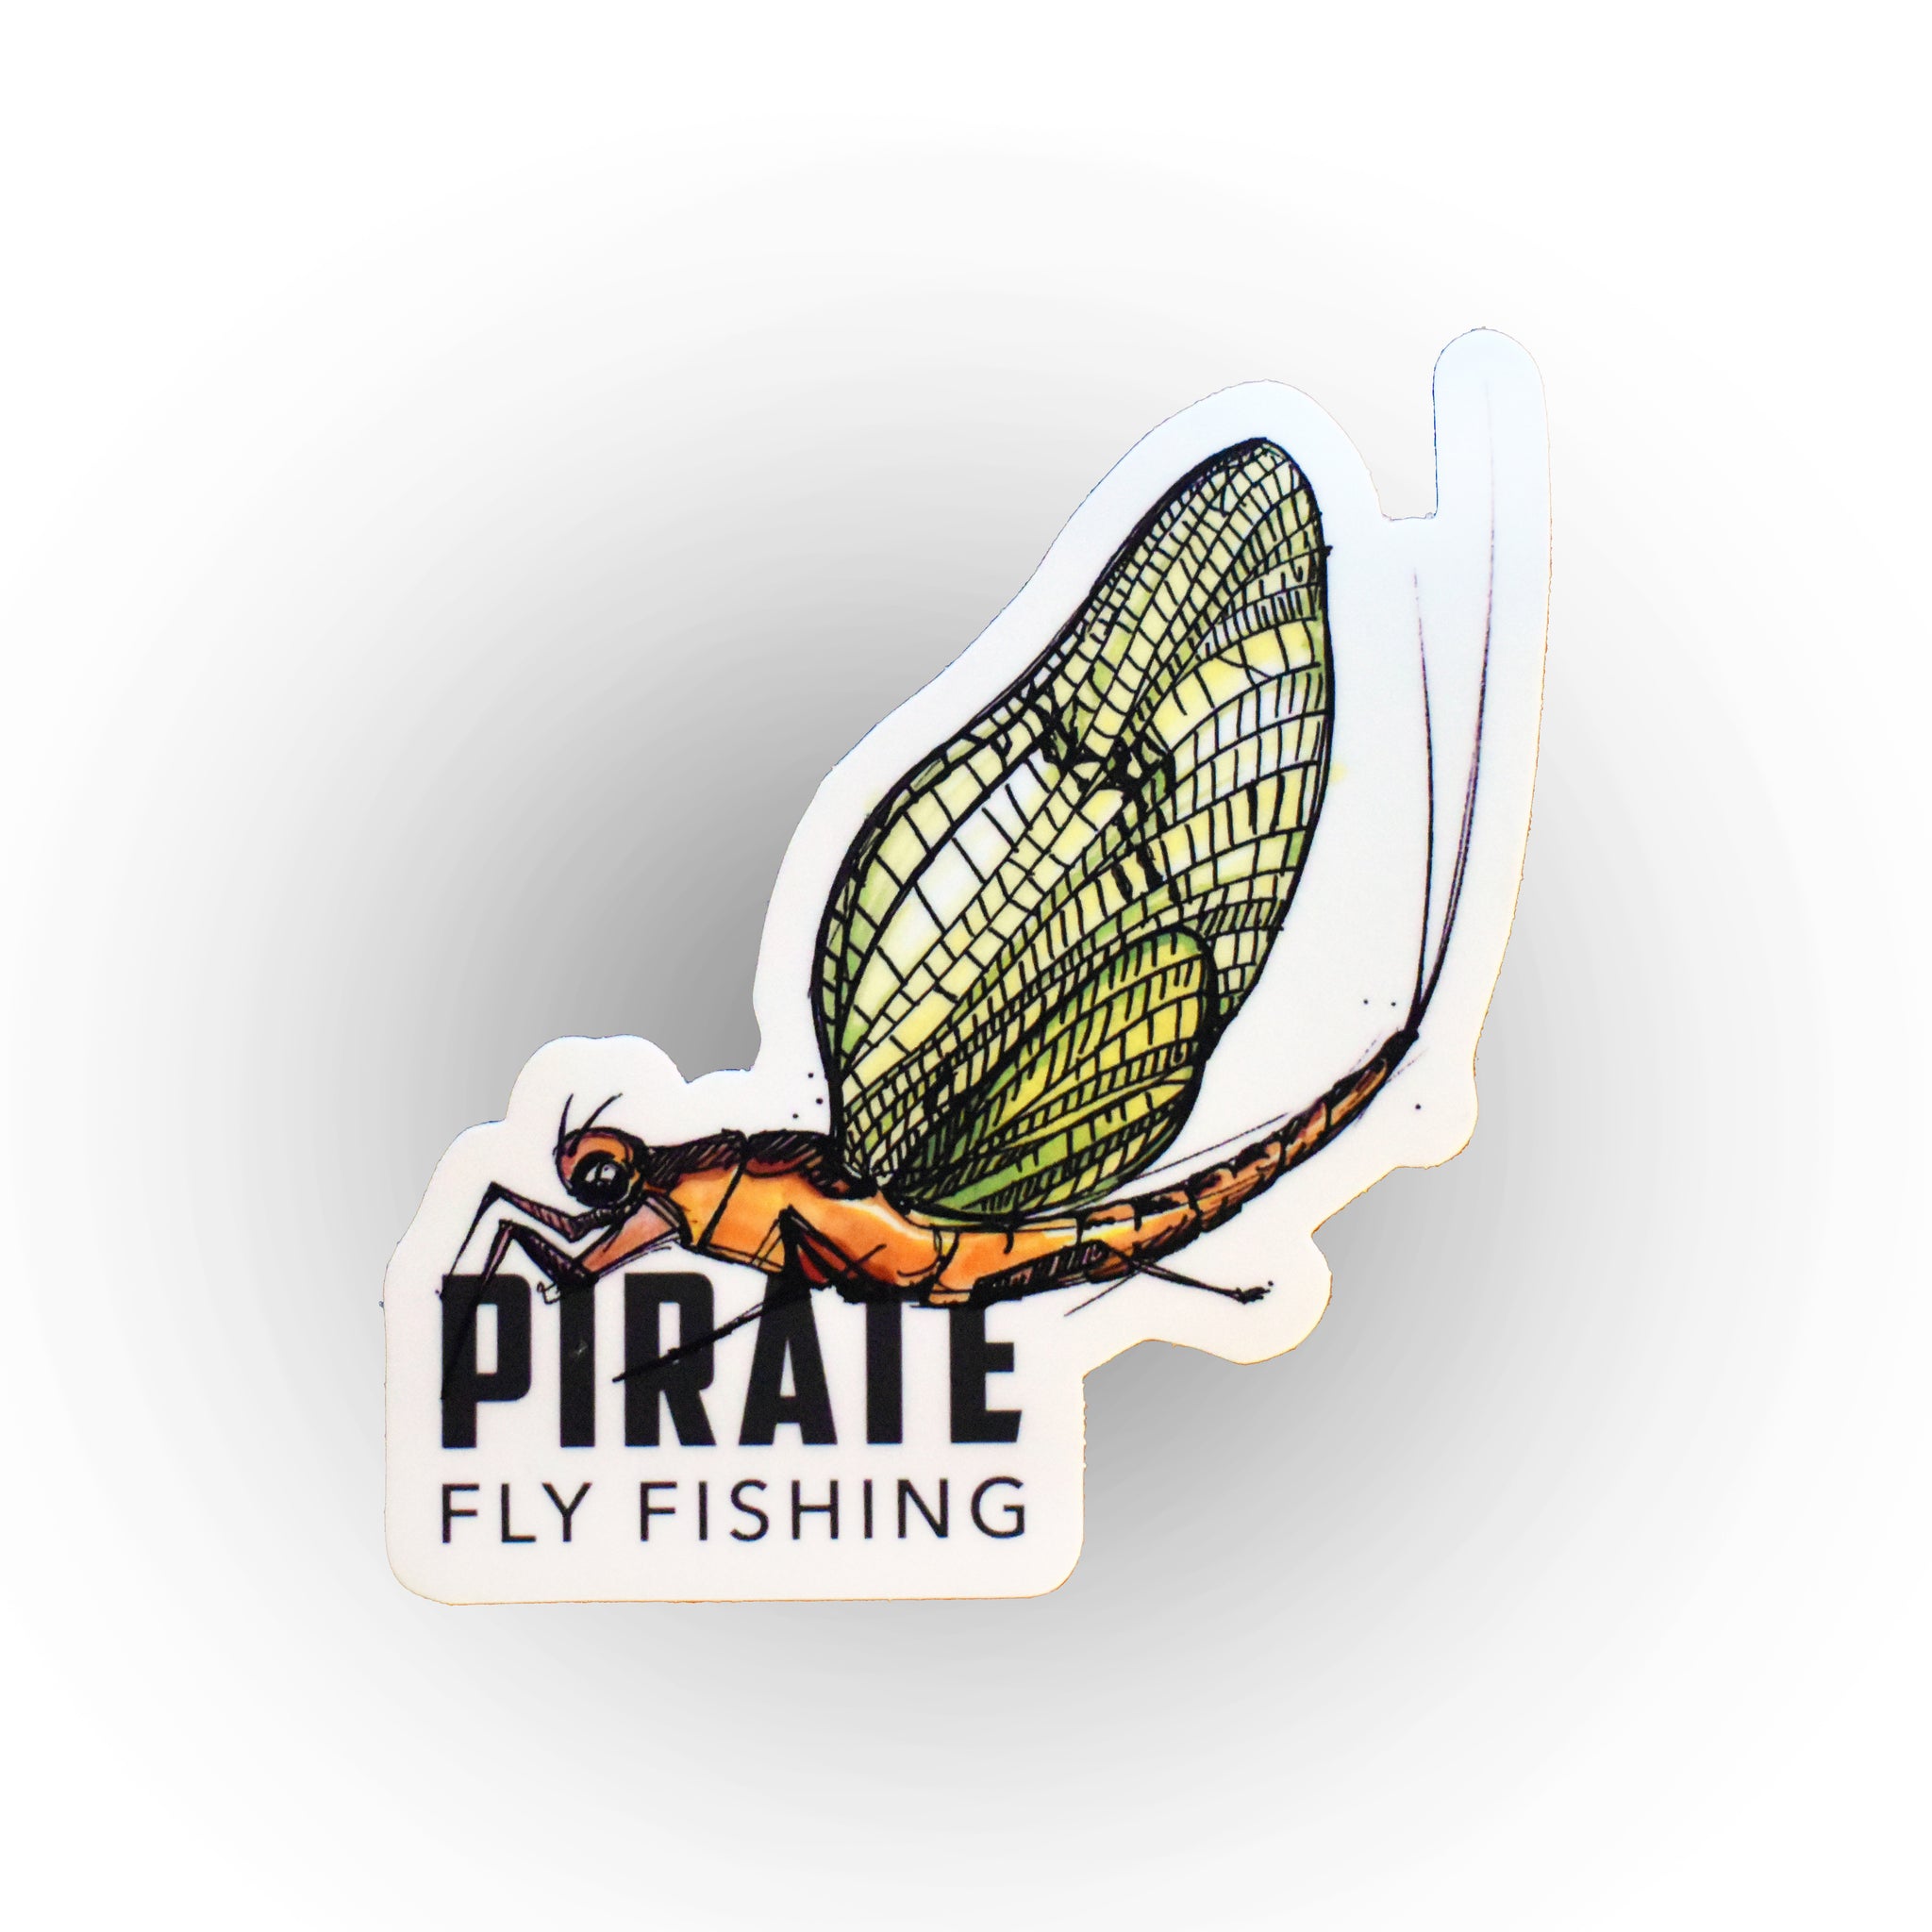 Products - Pirate Fly Fishing